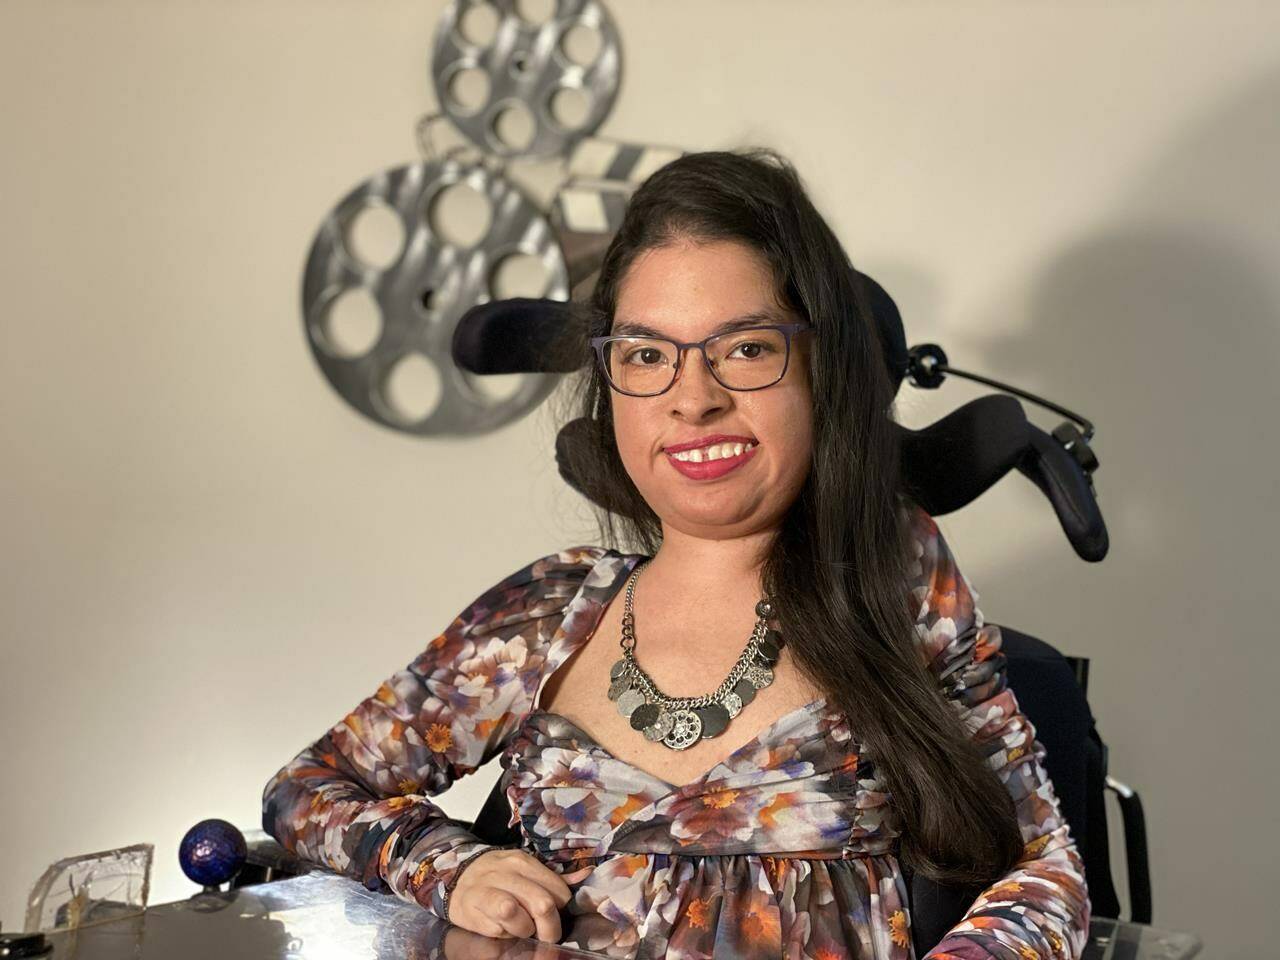 Michelle Asgarali, shown in a handout photo, is the producer of the new show “Breaking Character,” which follows a cast of disabled actors trying to make it. THE CANADIAN PRESS/-HO-AMI